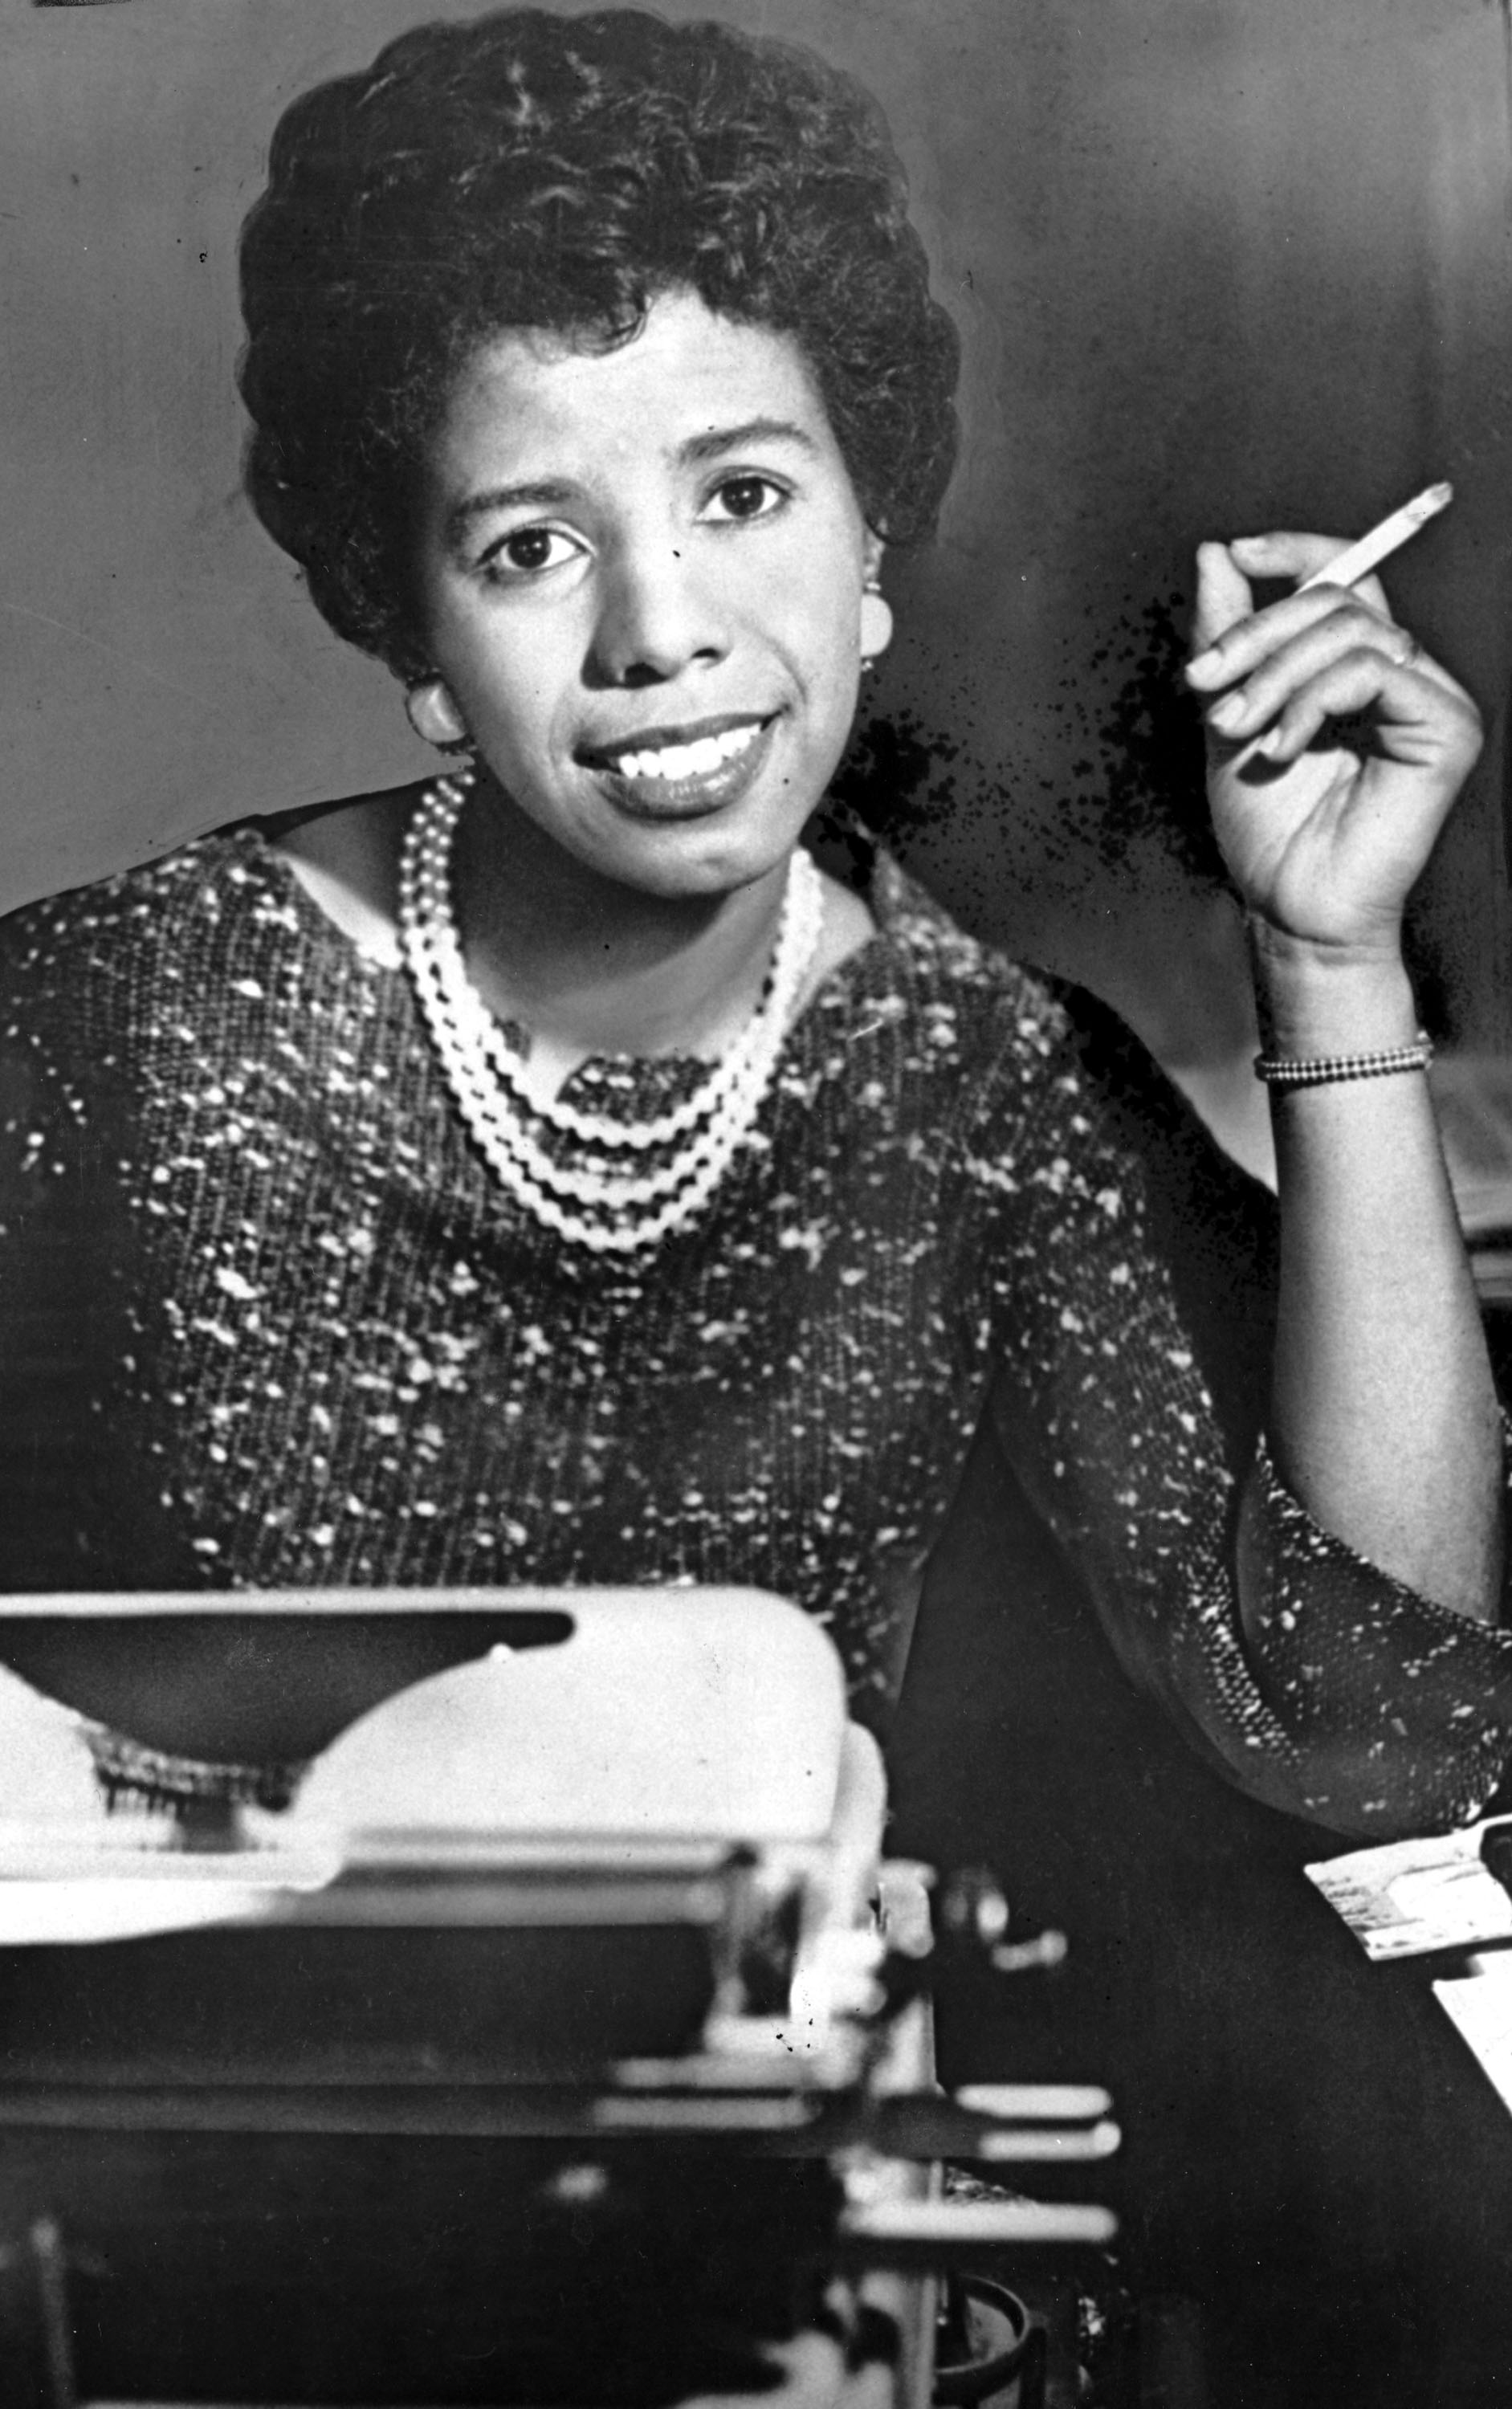 HANSBERRY - Lorraine Hansberry, 28-year-old playwright who won the Drama Critics' Award for her first play 